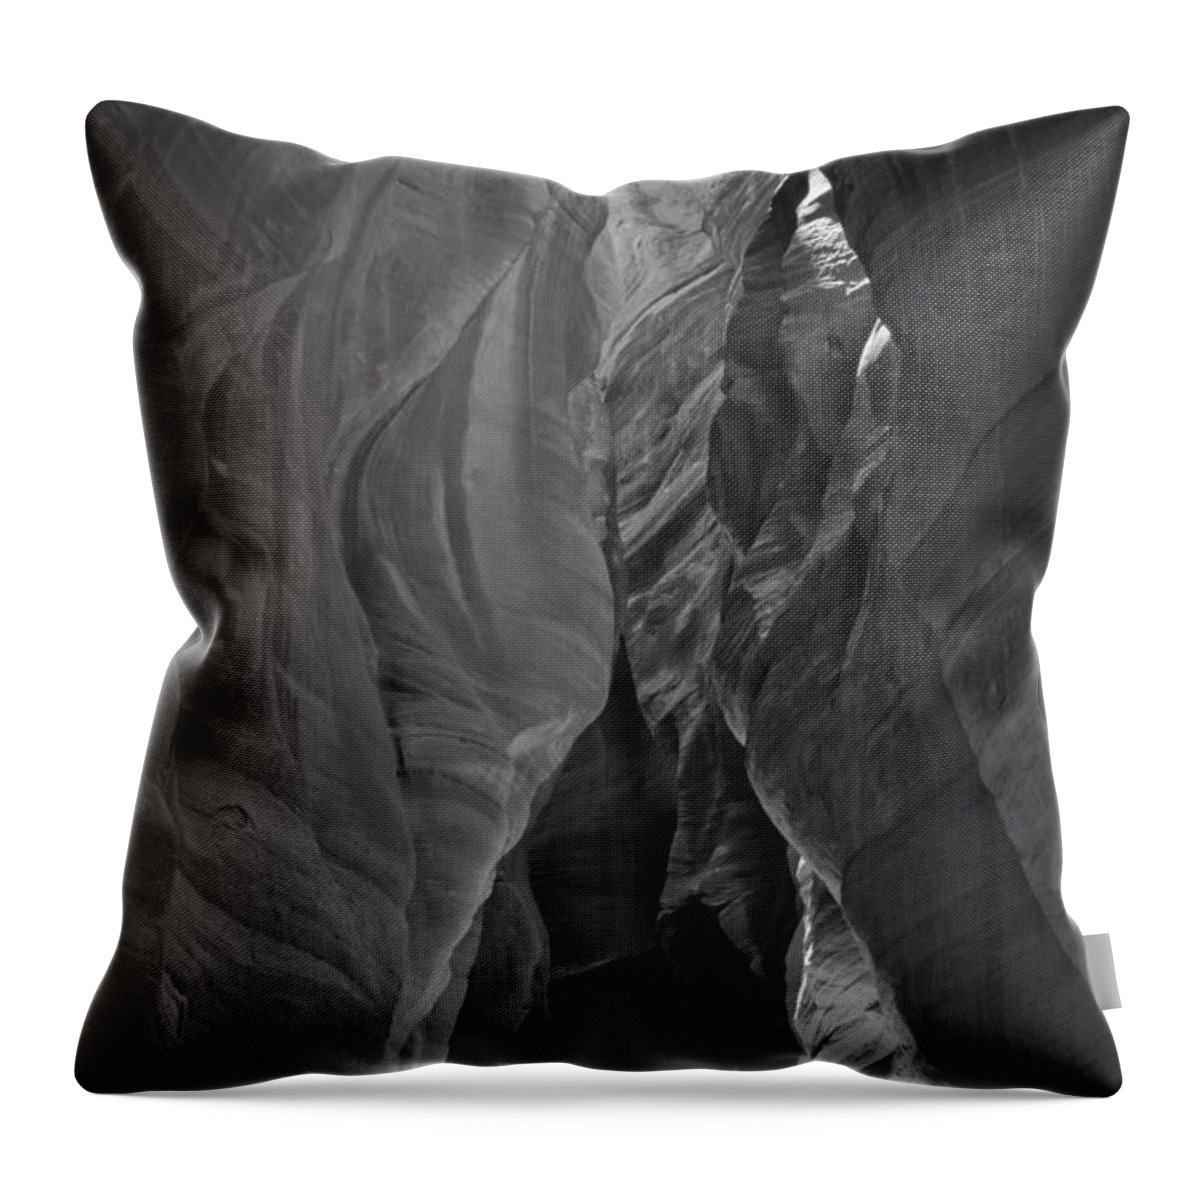 Slot Canyon Throw Pillow featuring the photograph Buckskin In Black And White by Adam Jewell